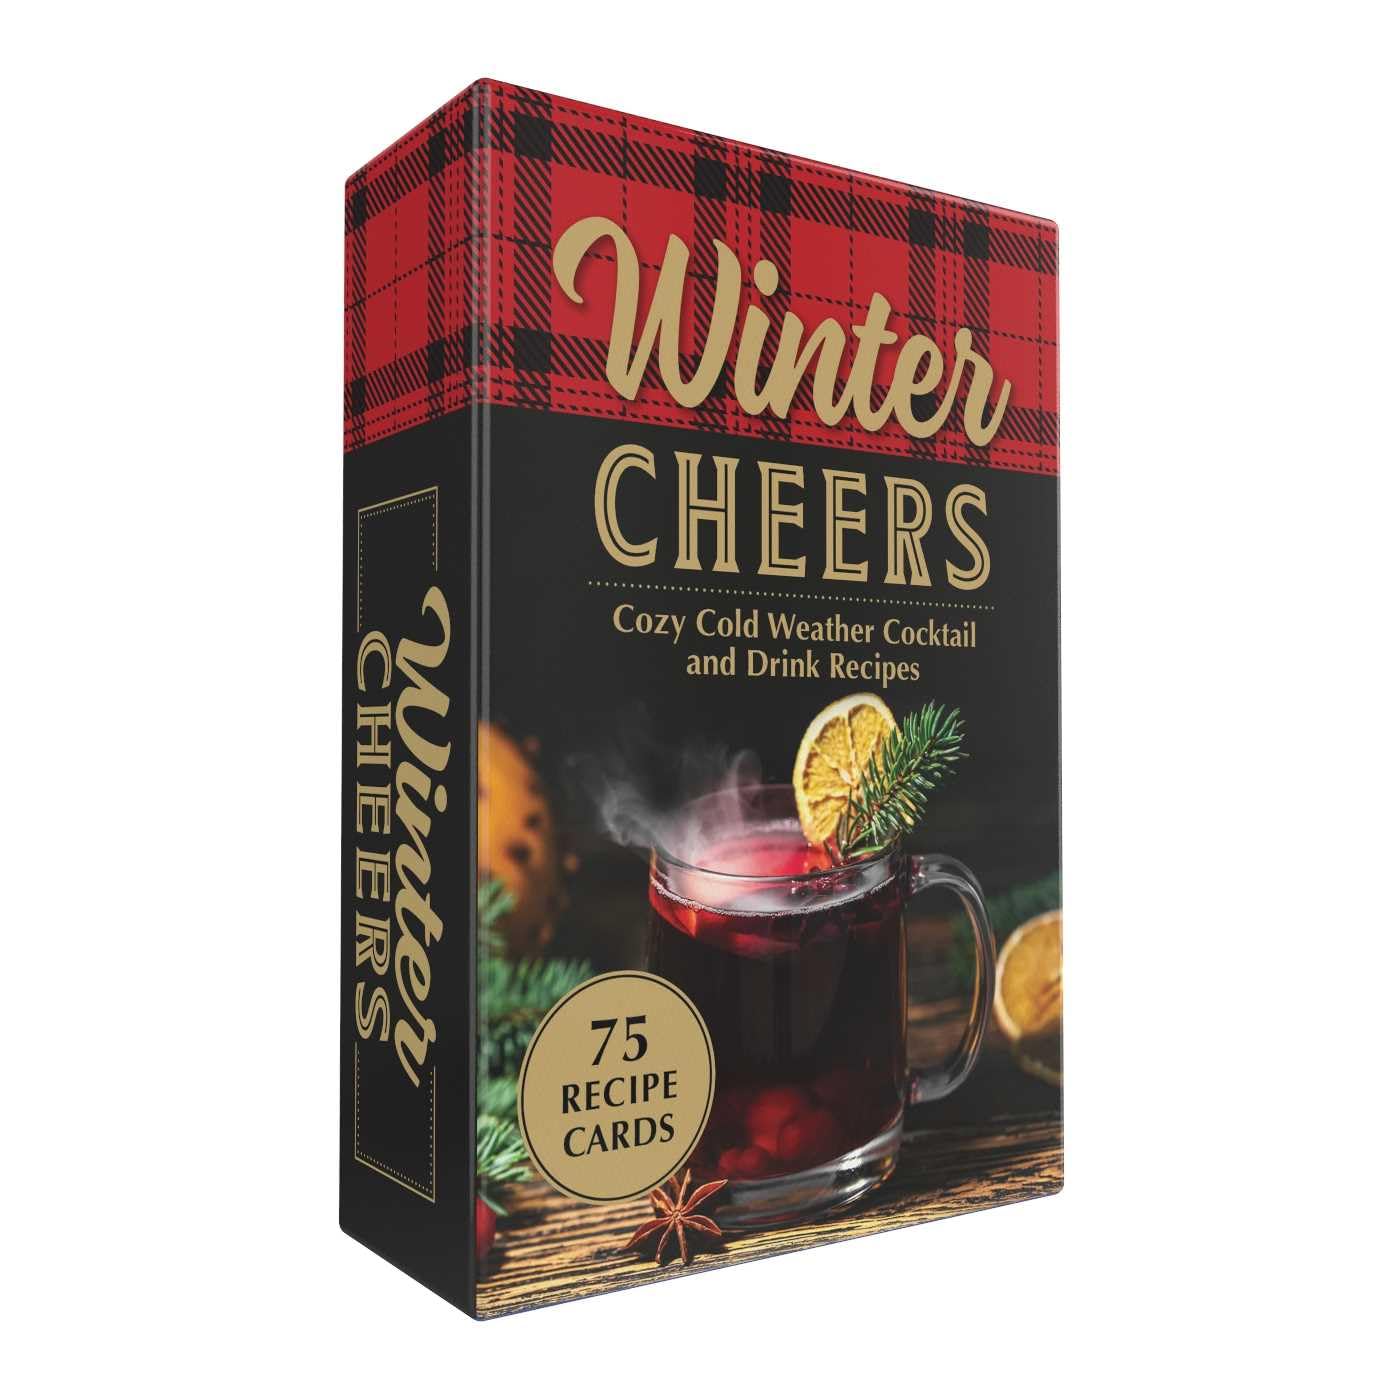 Winter Cheers: Cozy Cold Weather Cocktail And Drink Recipes